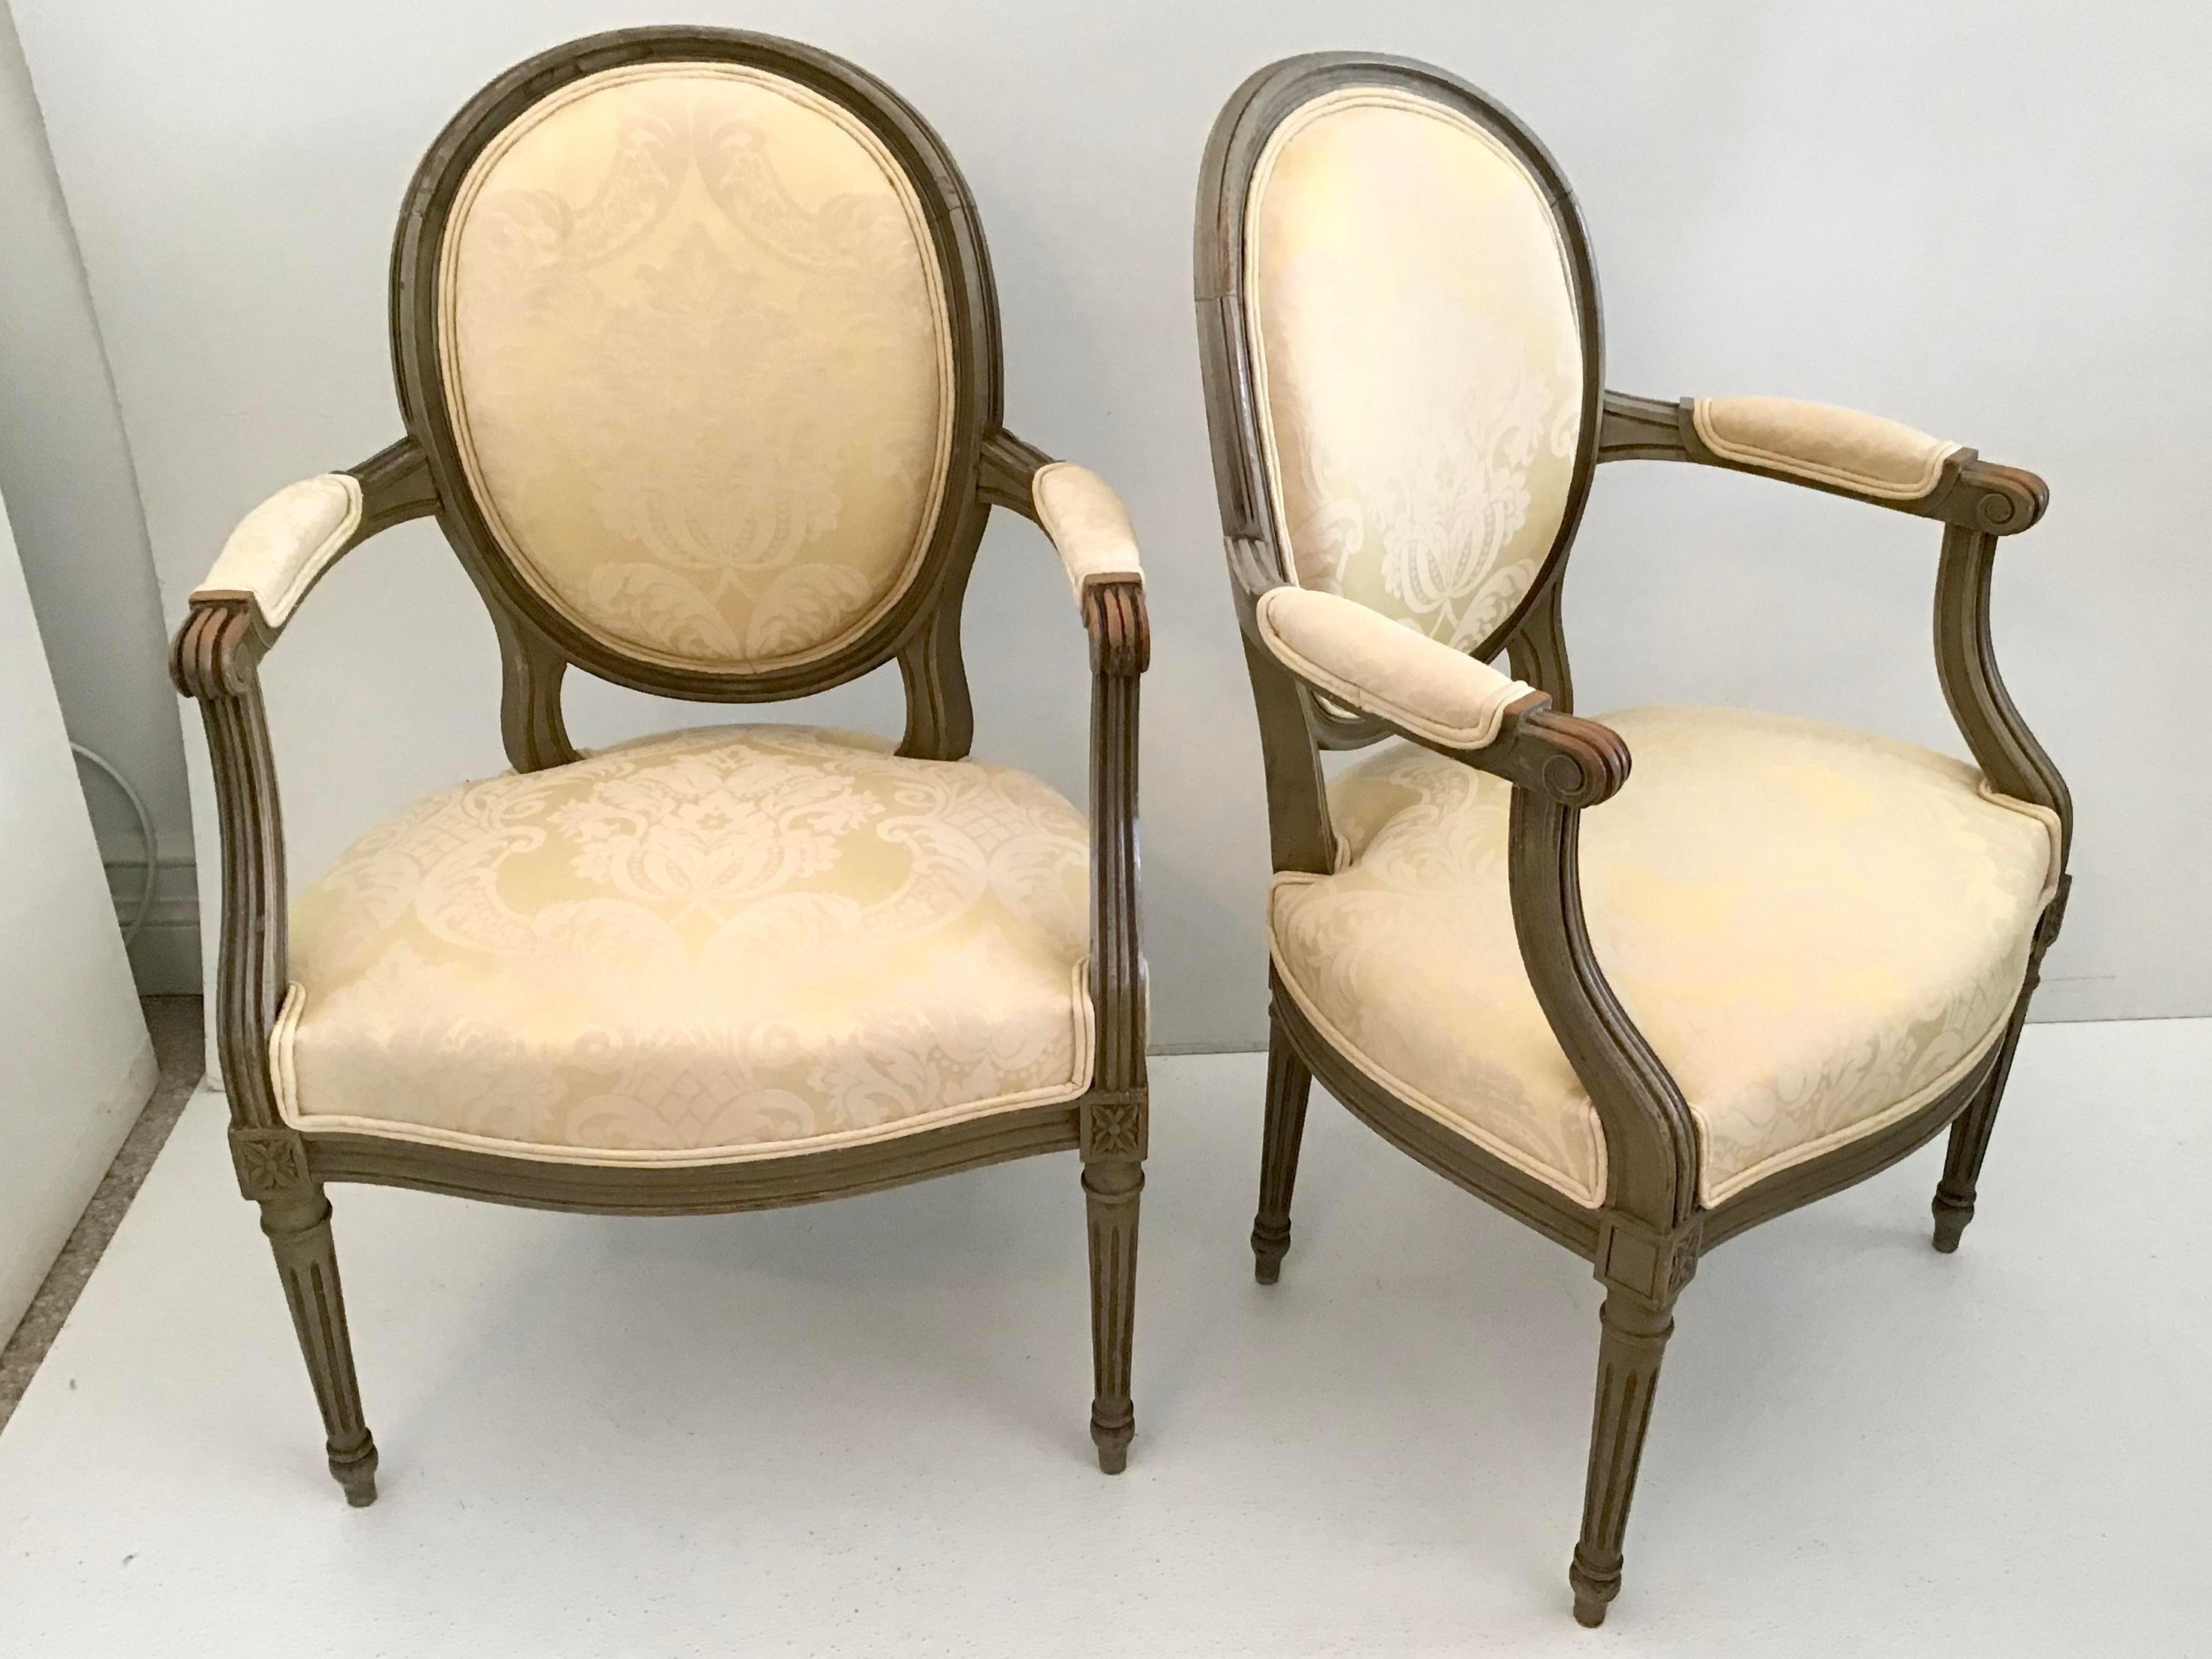 French Bronze Louis XVI Fauteuils in New Yellow Damask Upholstery, a Pair For Sale 1